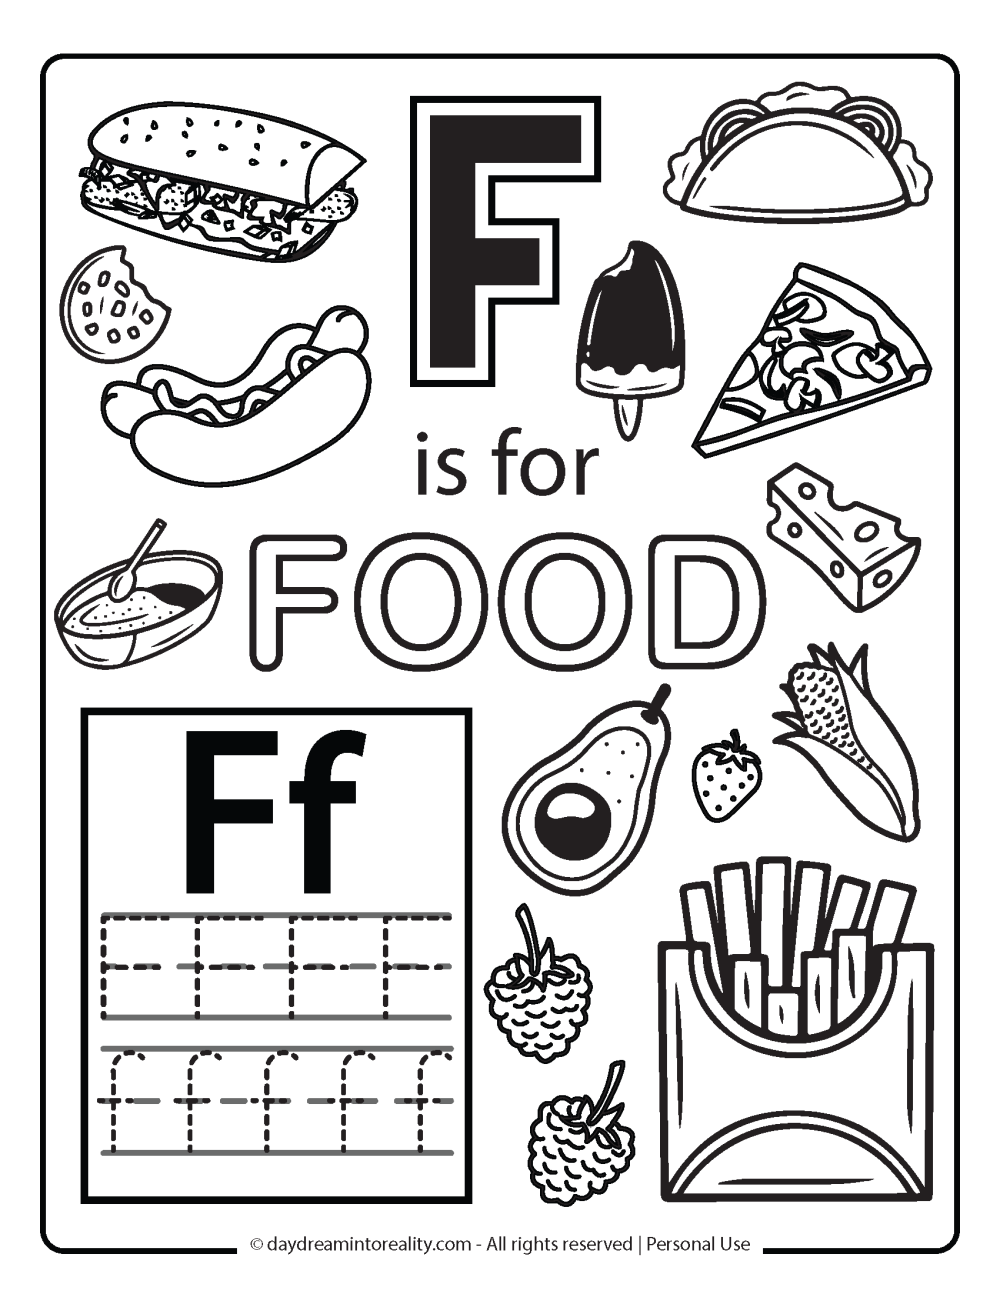 F is for food coloring page Free Printable